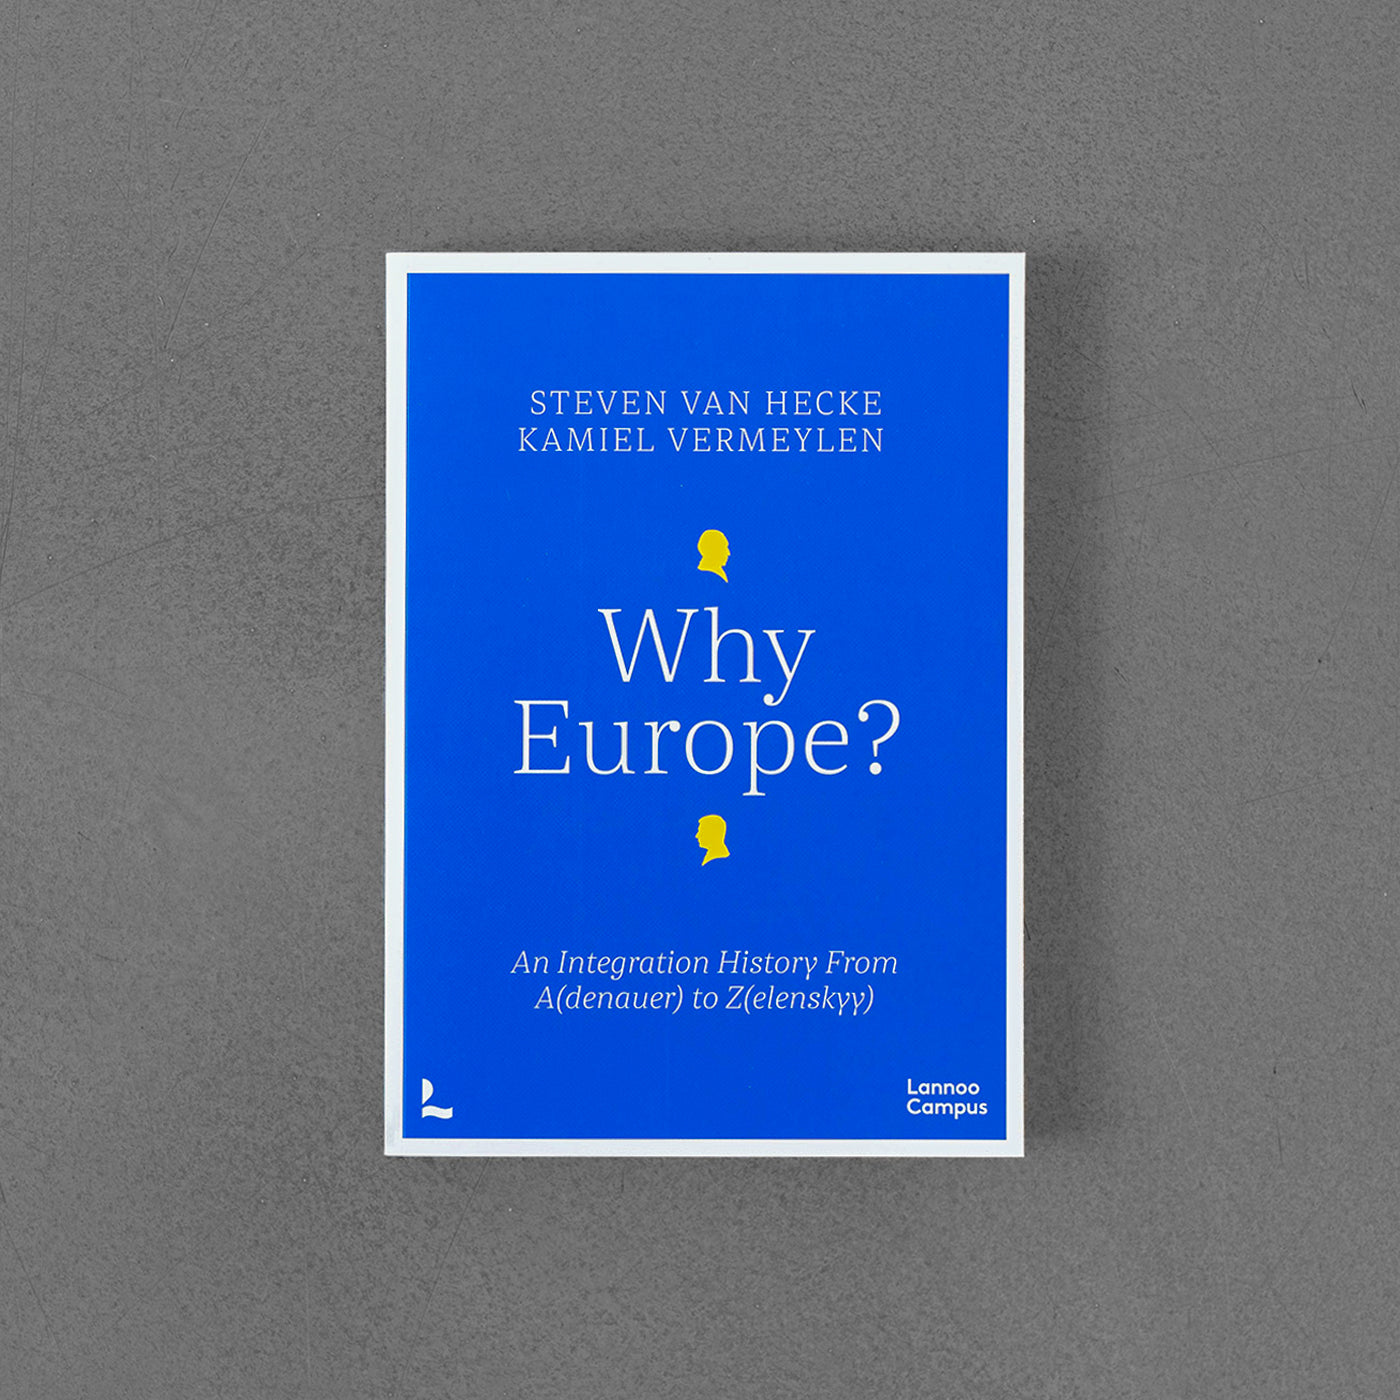 Why Europe? An Integration History From A(denauer) to Z(elenskyy)